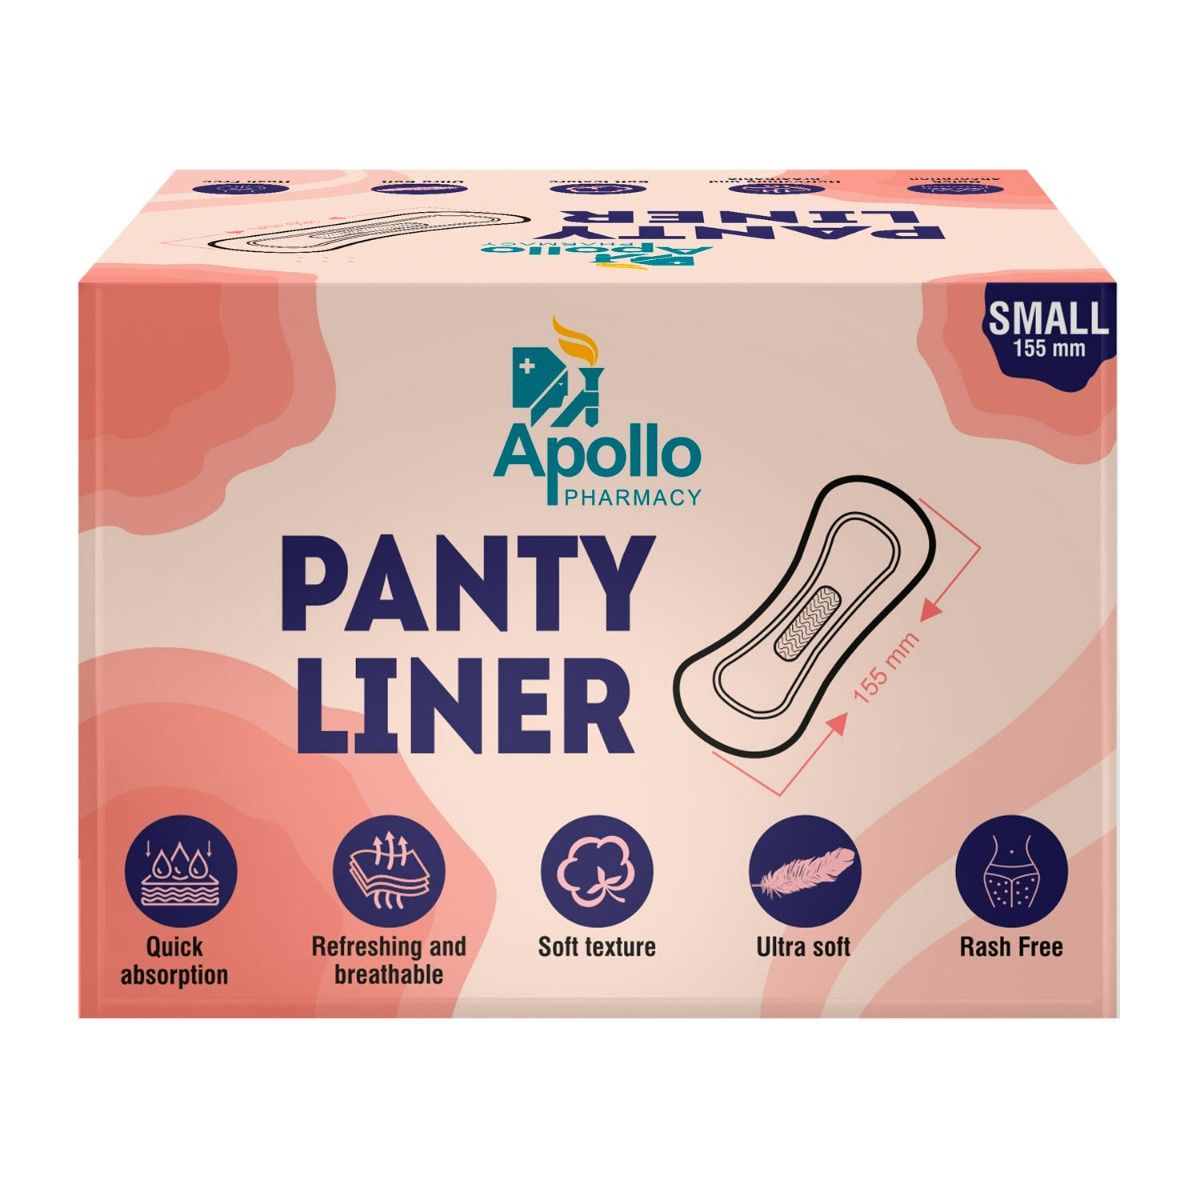 Apollo Pharmacy Panty Liner Small 155mm, 20 Count Price, Uses, Side  Effects, Composition - Apollo Pharmacy